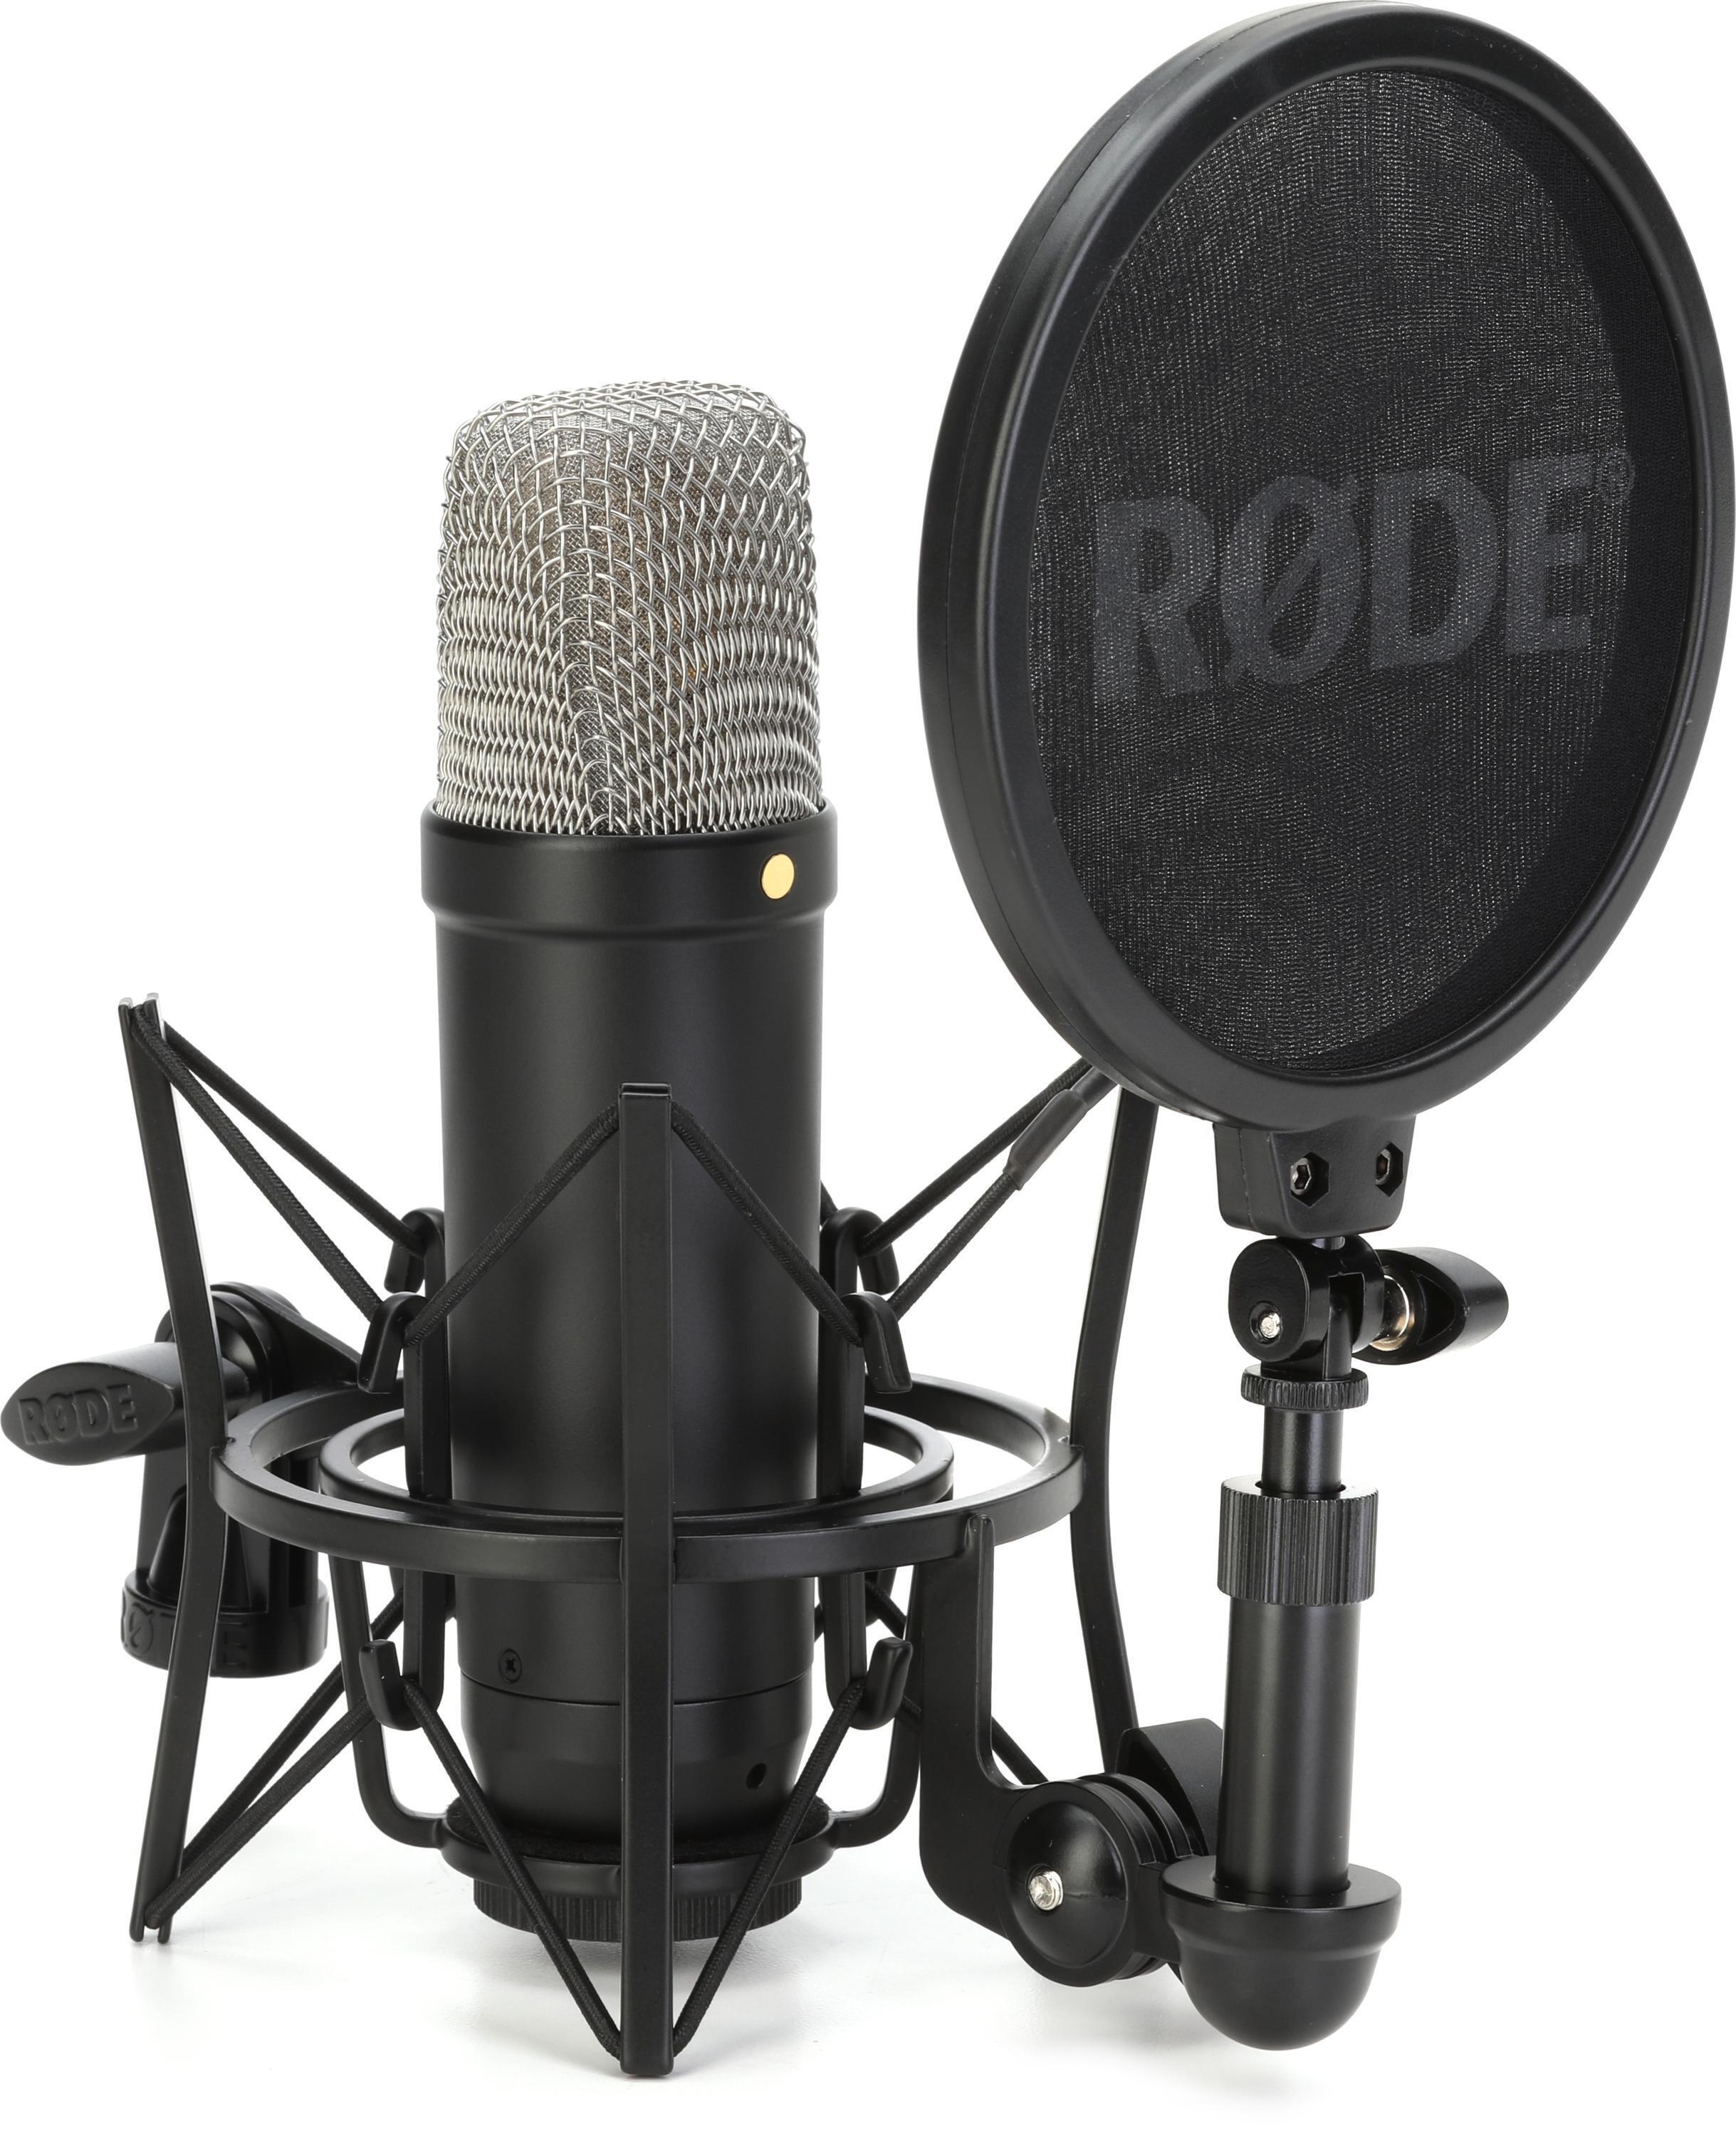 Bundled Item: Rode NT1 Signature Series Condenser Microphone with SM6 Shockmount and Pop Filter - Black